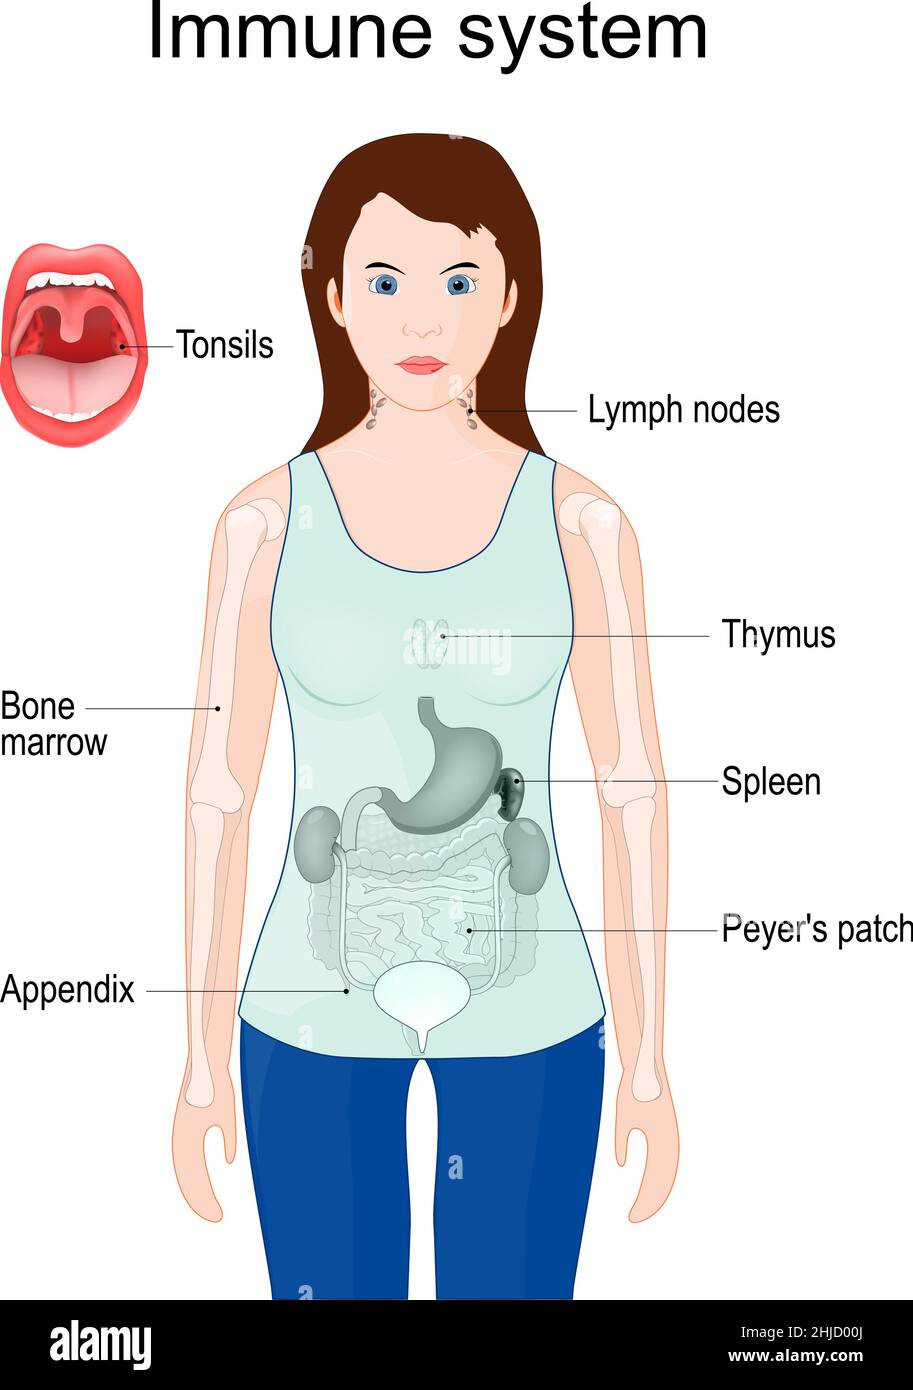 Immune system. woman silhouette with Internal organs: Appendix, Spleen, Thymus, Bone marrow, Tonsils in mouth, Lymph nodes, and Peyer's patch in intes Stock Vector